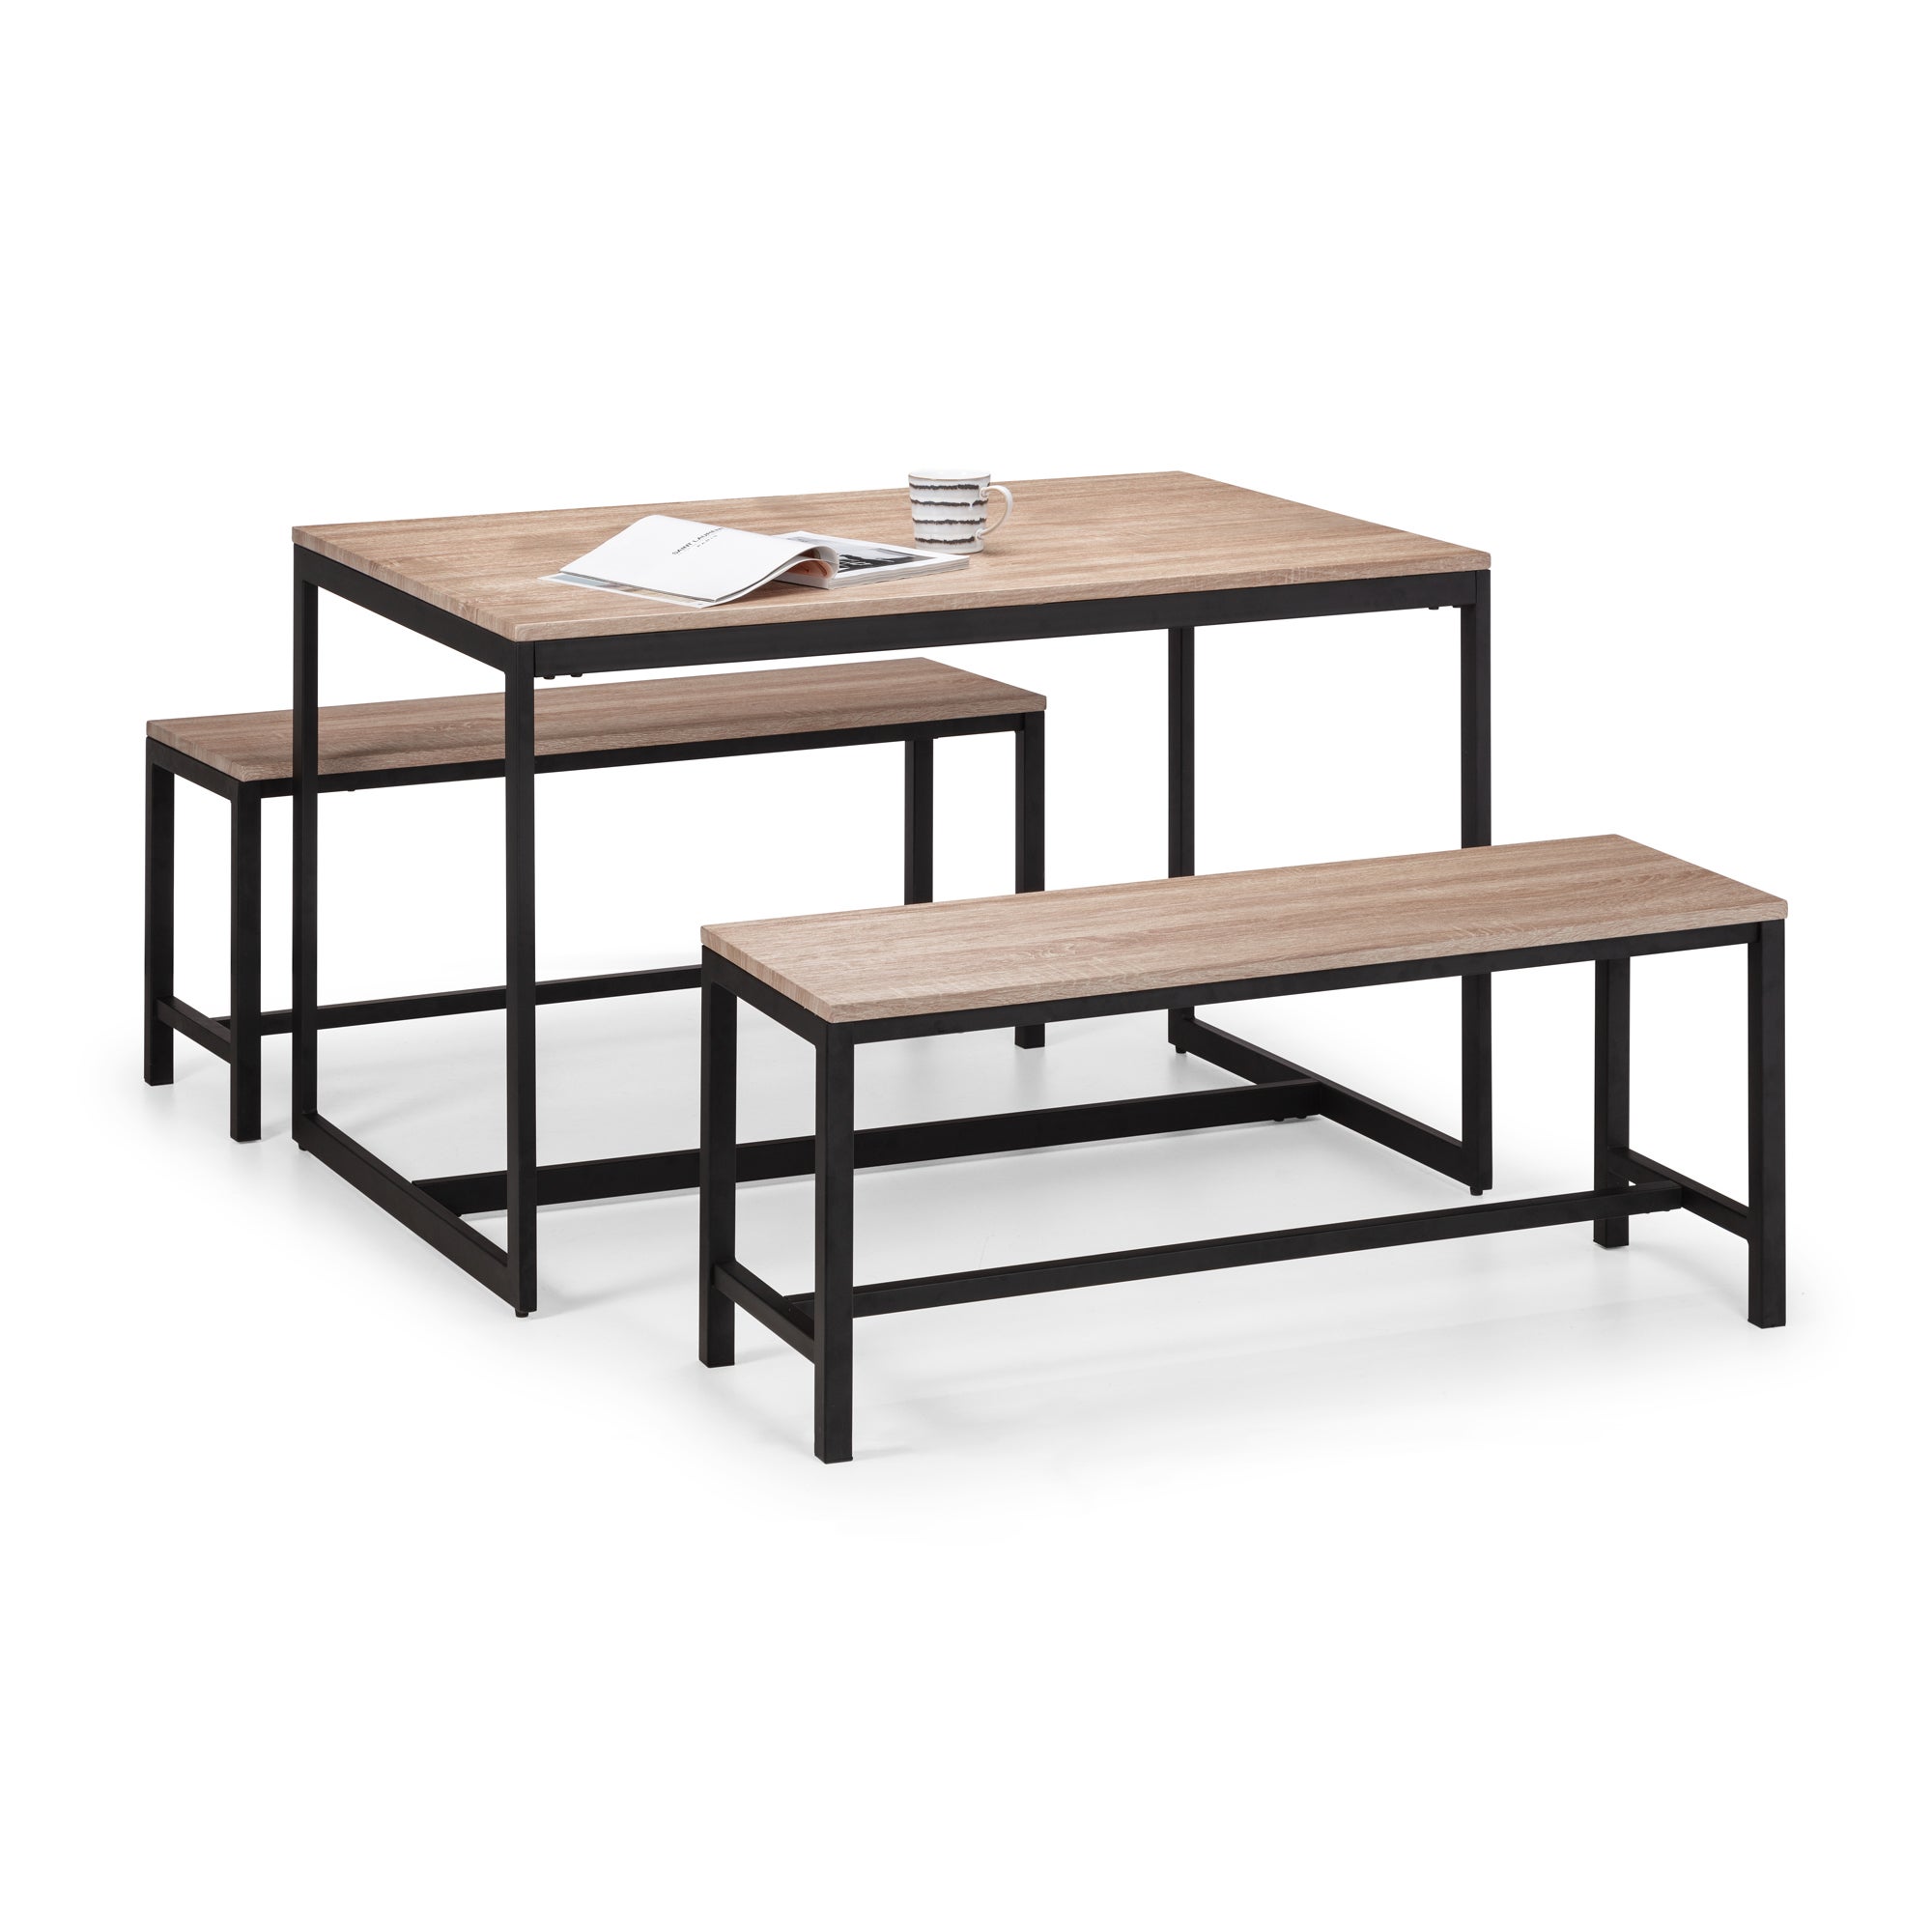 Tribeca Rectangular Dining Table with 2 Benches, Black Black